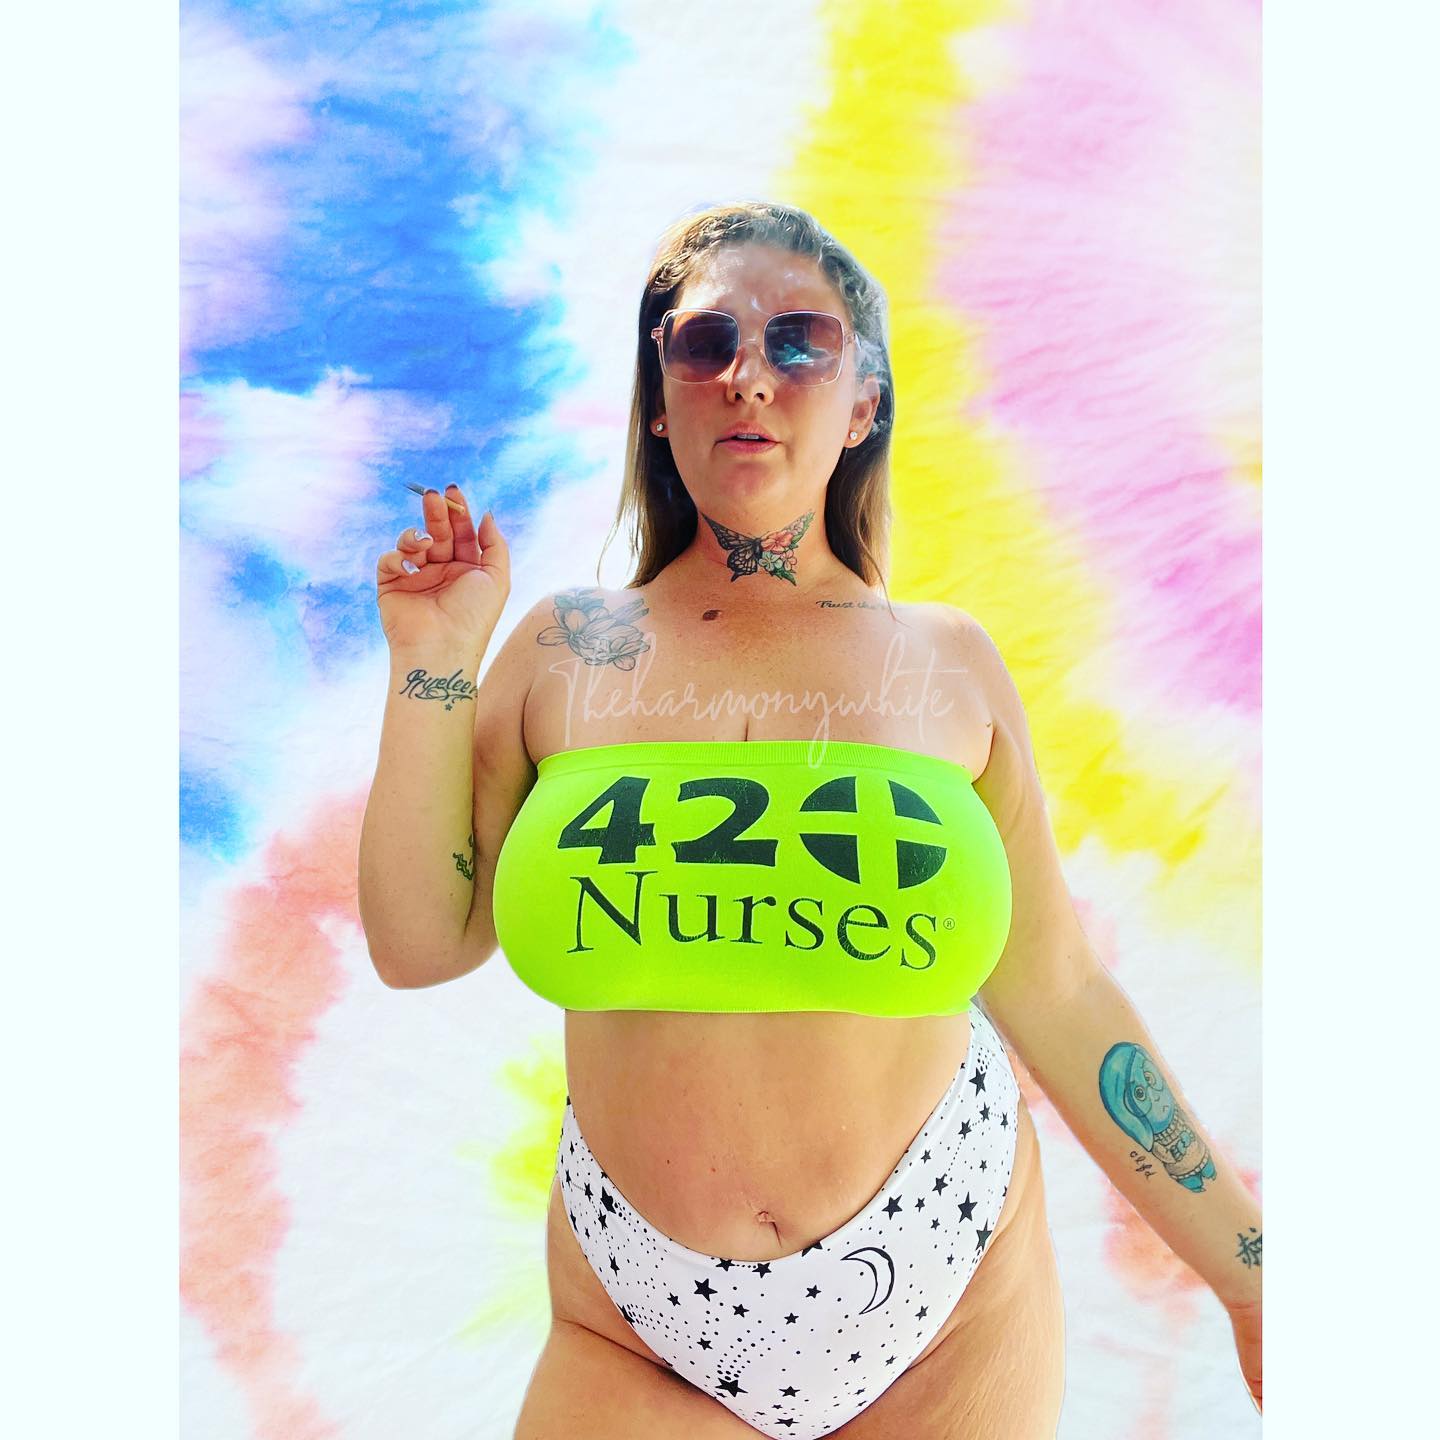 Happy 420 lovers 🌬️🍁 get outside today . Breathe in some fresh air and do some meditation.  Touch grass .
Smell flowers . Eat wholesome food and vibe it out . Bust out the water colors or another creation. Show yourself some love . And don’t forget to stay lifted and hydrated . 
.
.
.
#selfcare #420nurses #healthiswealth #florida #sunshine #harmonywhite #smokeone #marleyday